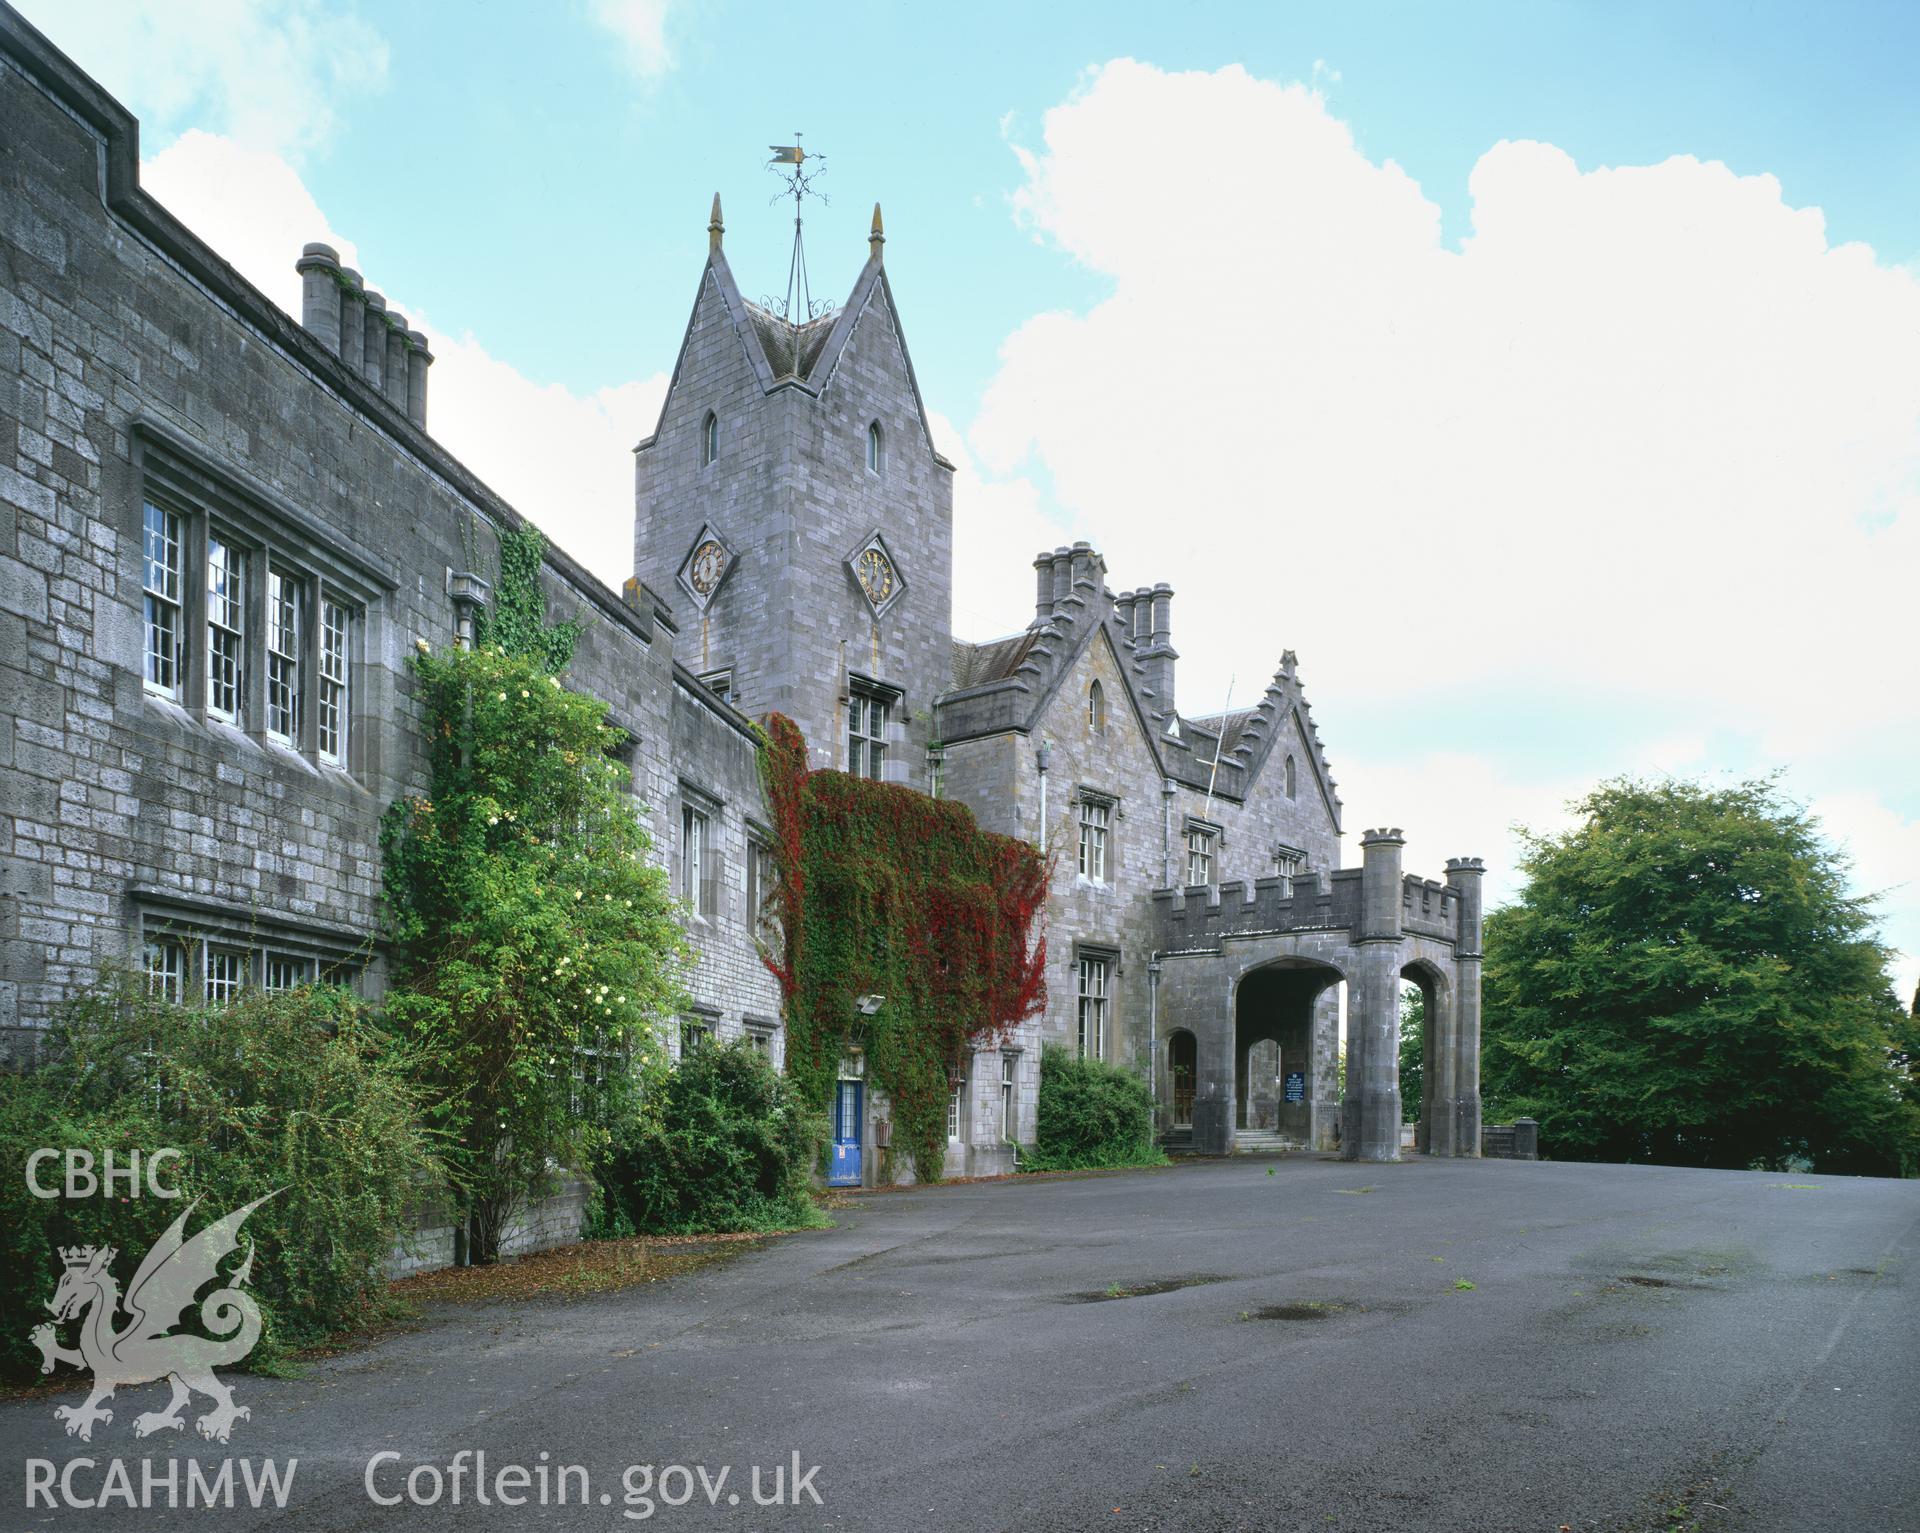 RCAHMW colour transparency showing Golden Grove, Llandeilo taken by I.N. Wright, September 2005